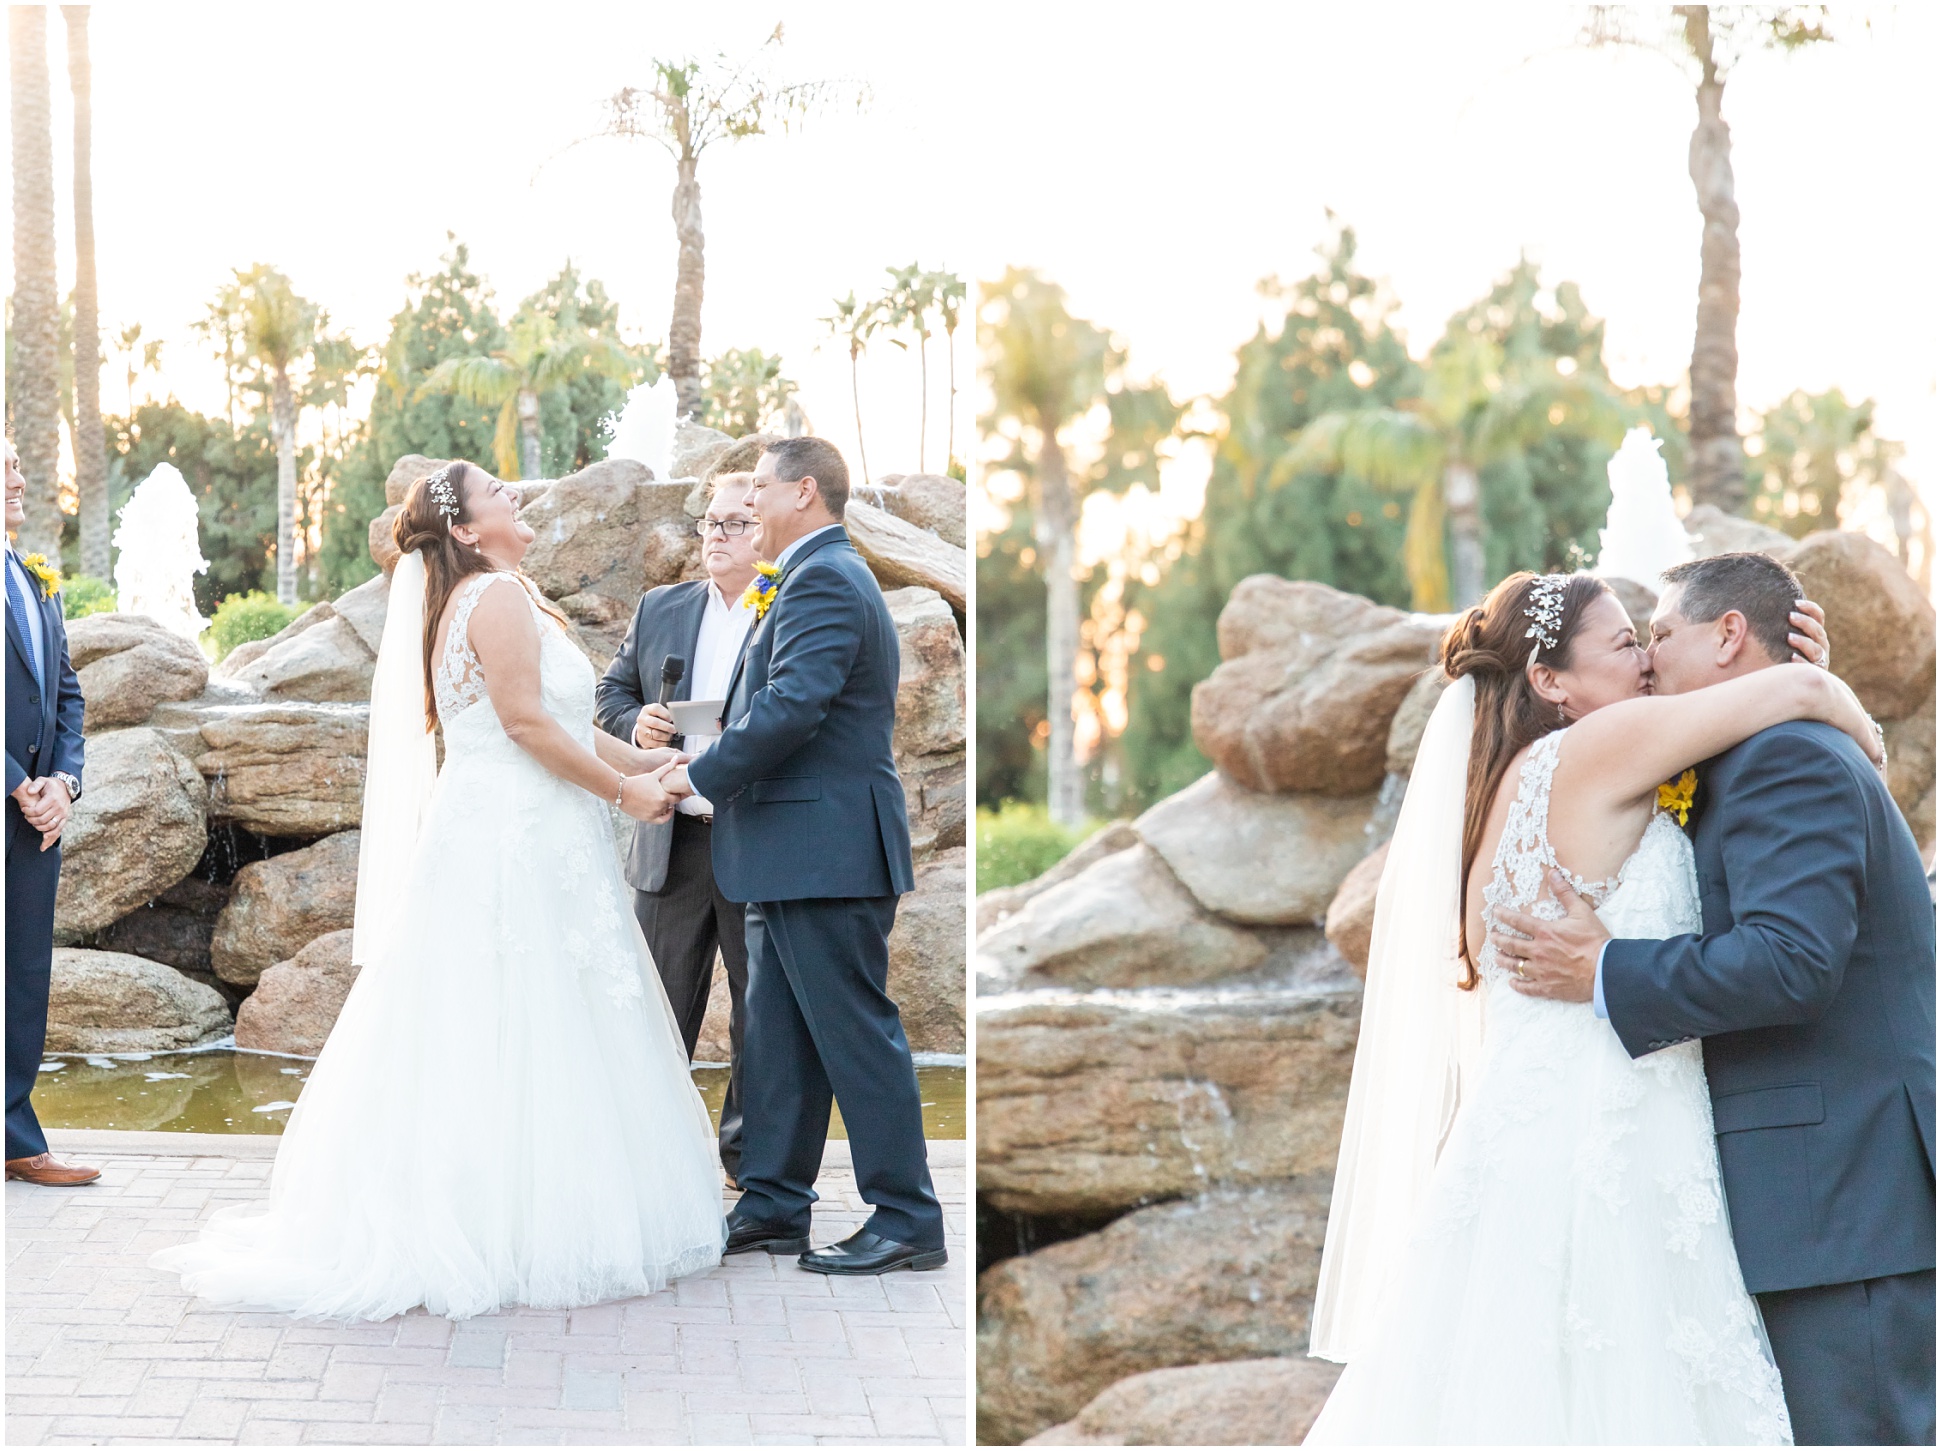 Two Images of the Intimate Ceremony